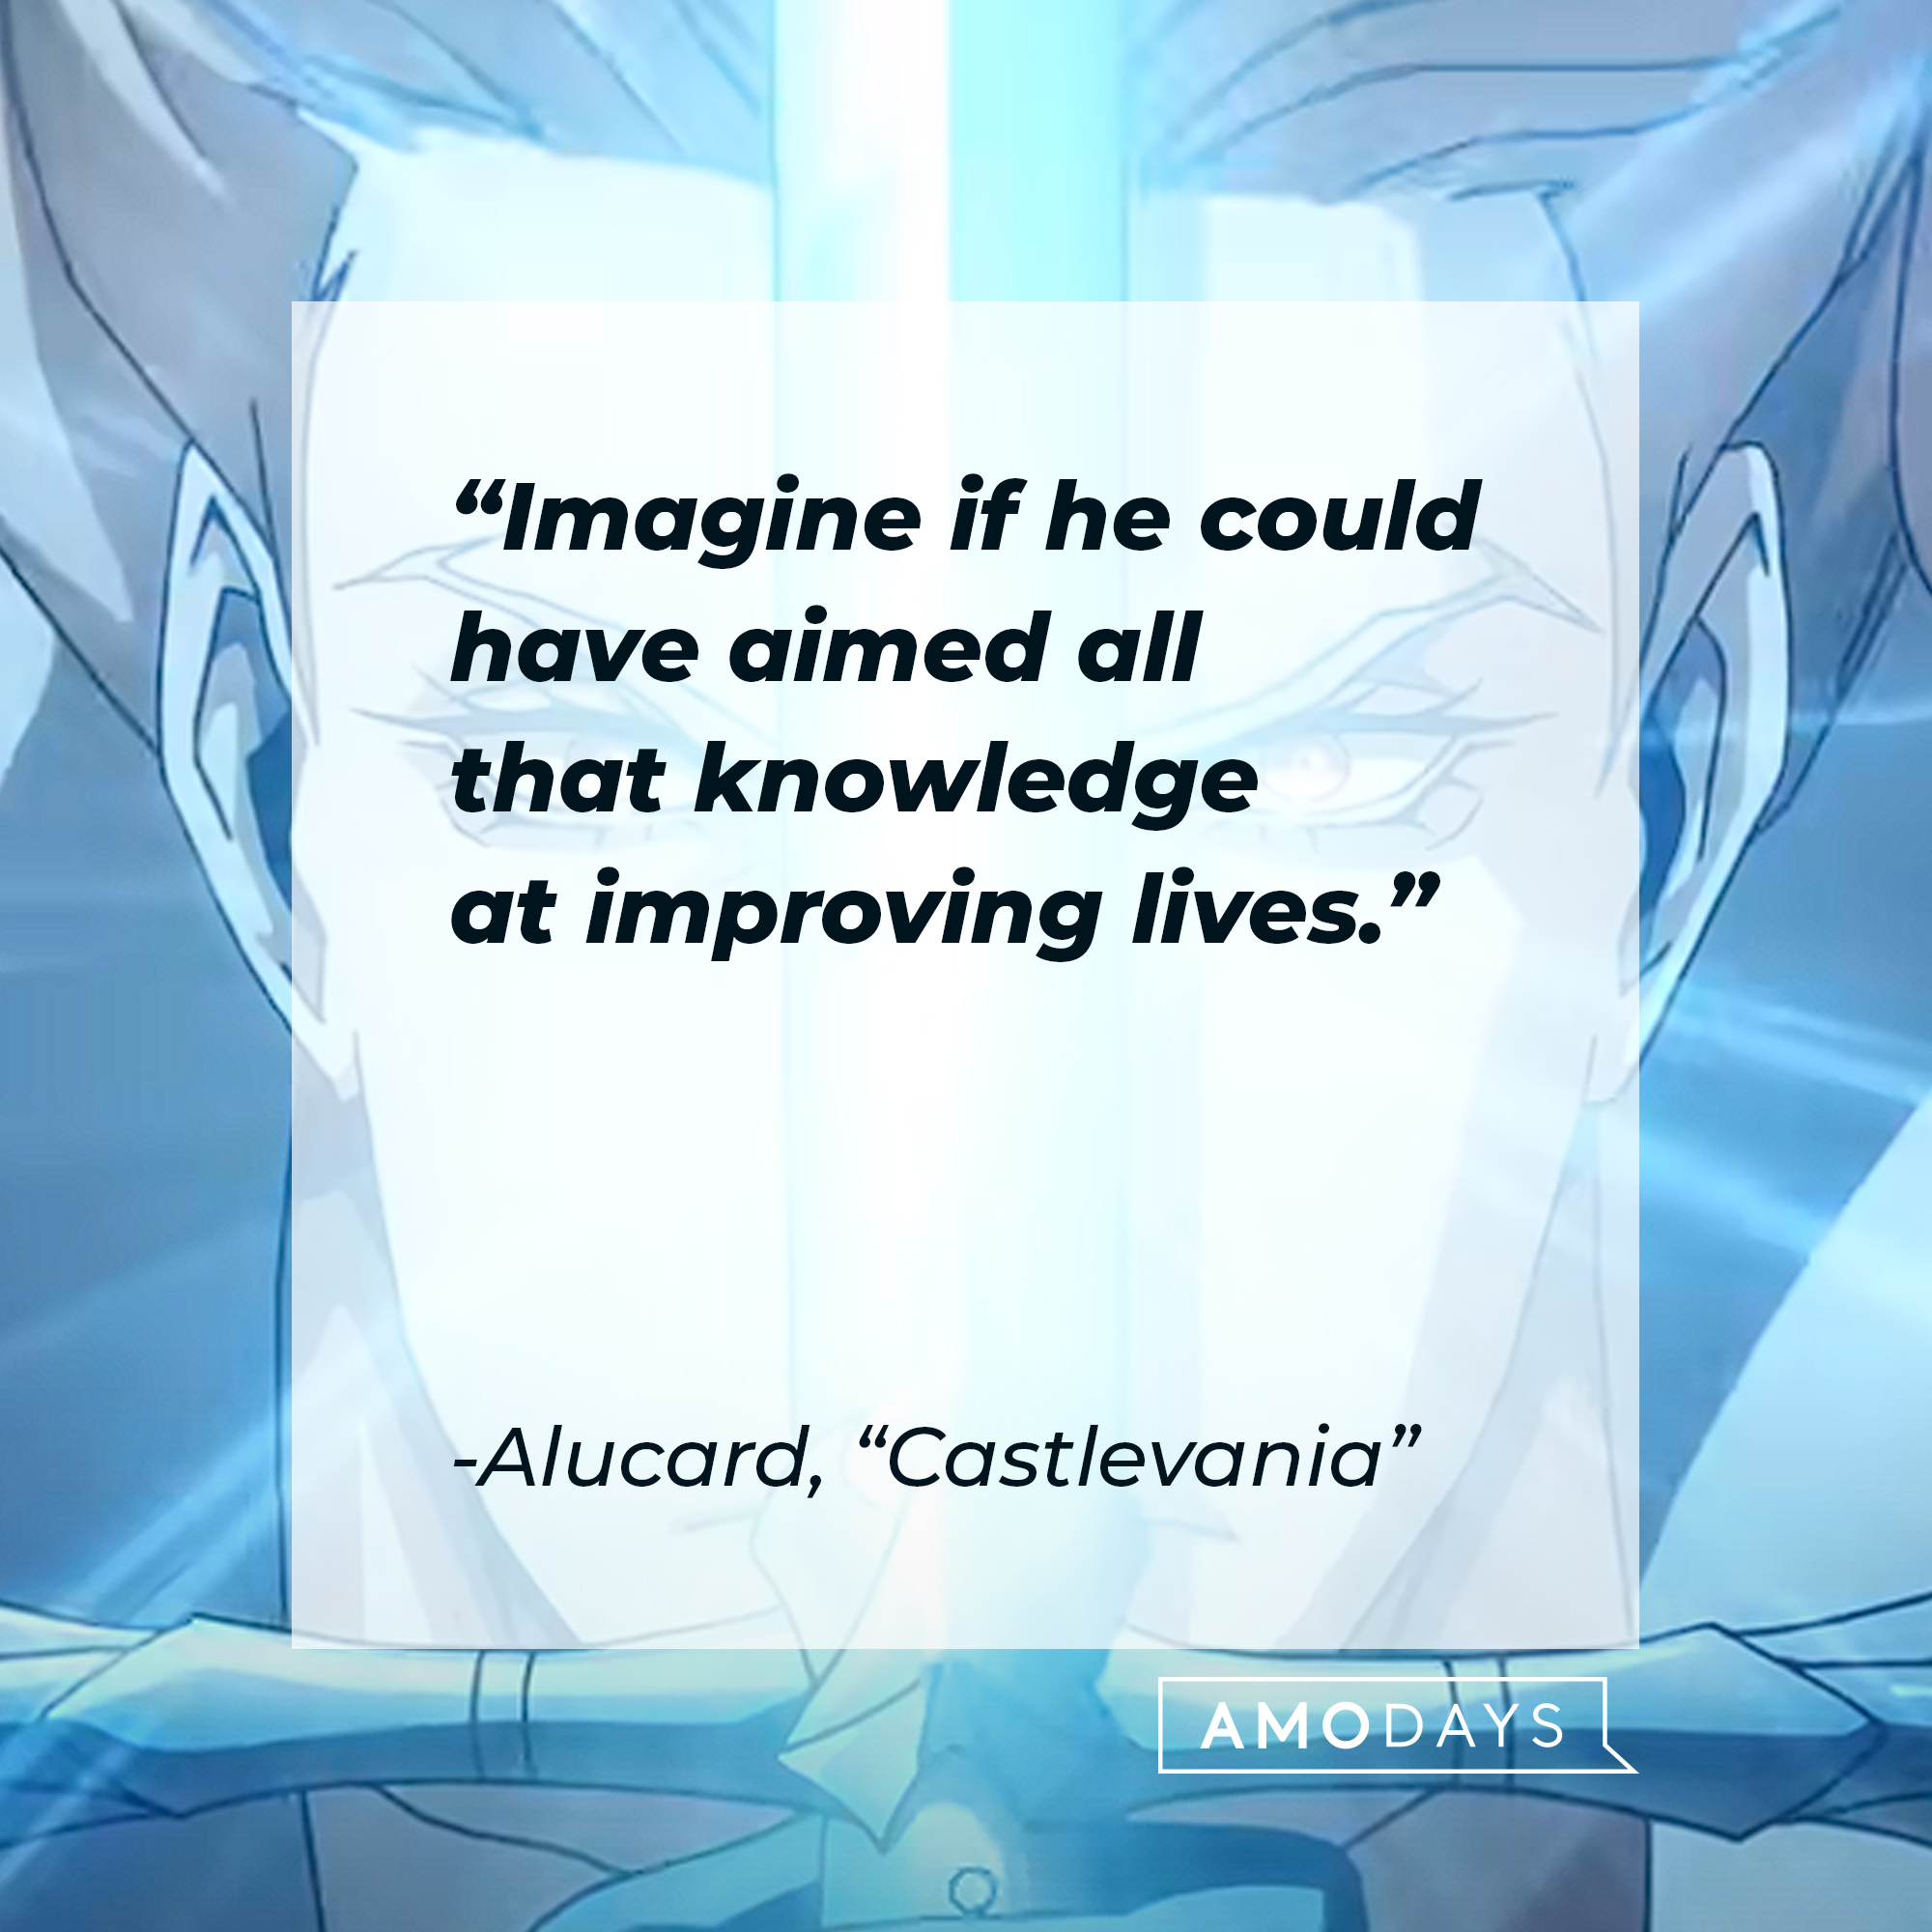 Alucard's quote from "Castlevania:" “Imagine id he could have aimed all that knowledge at improving lives.” | Source: Youtube.com/Netflix